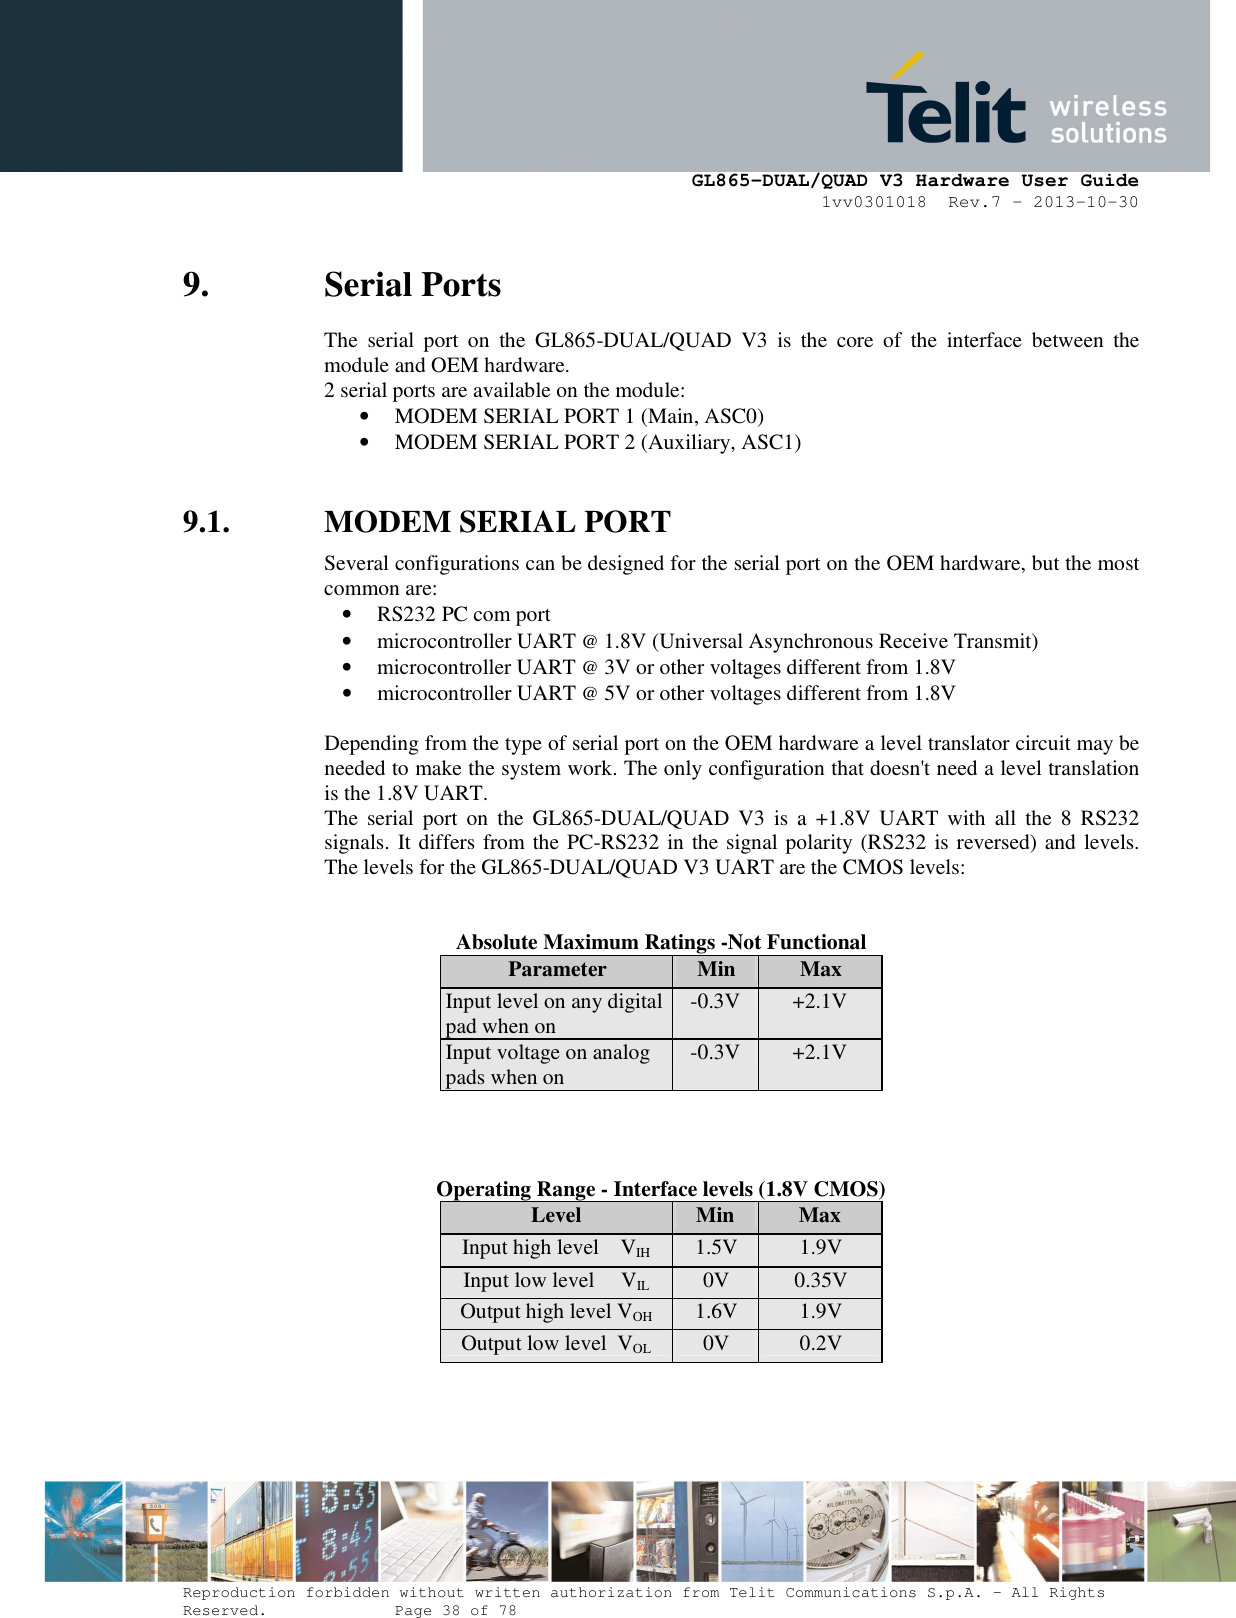      GL865-DUAL/QUAD V3 Hardware User Guide 1vv0301018  Rev.7 – 2013-10-30  Reproduction forbidden without written authorization from Telit Communications S.p.A. - All Rights Reserved.    Page 38 of 78 Mod. 0805 2011-07 Rev.2 9. Serial Ports The  serial  port  on  the  GL865-DUAL/QUAD  V3  is  the  core  of  the  interface  between  the module and OEM hardware.  2 serial ports are available on the module: • MODEM SERIAL PORT 1 (Main, ASC0) • MODEM SERIAL PORT 2 (Auxiliary, ASC1)  9.1. MODEM SERIAL PORT  Several configurations can be designed for the serial port on the OEM hardware, but the most common are: • RS232 PC com port • microcontroller UART @ 1.8V (Universal Asynchronous Receive Transmit)  • microcontroller UART @ 3V or other voltages different from 1.8V  • microcontroller UART @ 5V or other voltages different from 1.8V   Depending from the type of serial port on the OEM hardware a level translator circuit may be needed to make the system work. The only configuration that doesn&apos;t need a level translation is the 1.8V UART. The  serial  port  on  the  GL865-DUAL/QUAD  V3  is  a  +1.8V  UART  with  all  the  8  RS232 signals. It differs from the PC-RS232 in the signal polarity (RS232 is reversed) and levels. The levels for the GL865-DUAL/QUAD V3 UART are the CMOS levels:   Absolute Maximum Ratings -Not Functional Parameter  Min  Max Input level on any digital pad when on  -0.3V  +2.1V Input voltage on analog pads when on  -0.3V  +2.1V   Operating Range - Interface levels (1.8V CMOS) Level  Min  Max Input high level    VIH 1.5V  1.9V Input low level     VIL  0V  0.35V Output high level VOH  1.6V  1.9V Output low level  VOL  0V  0.2V  